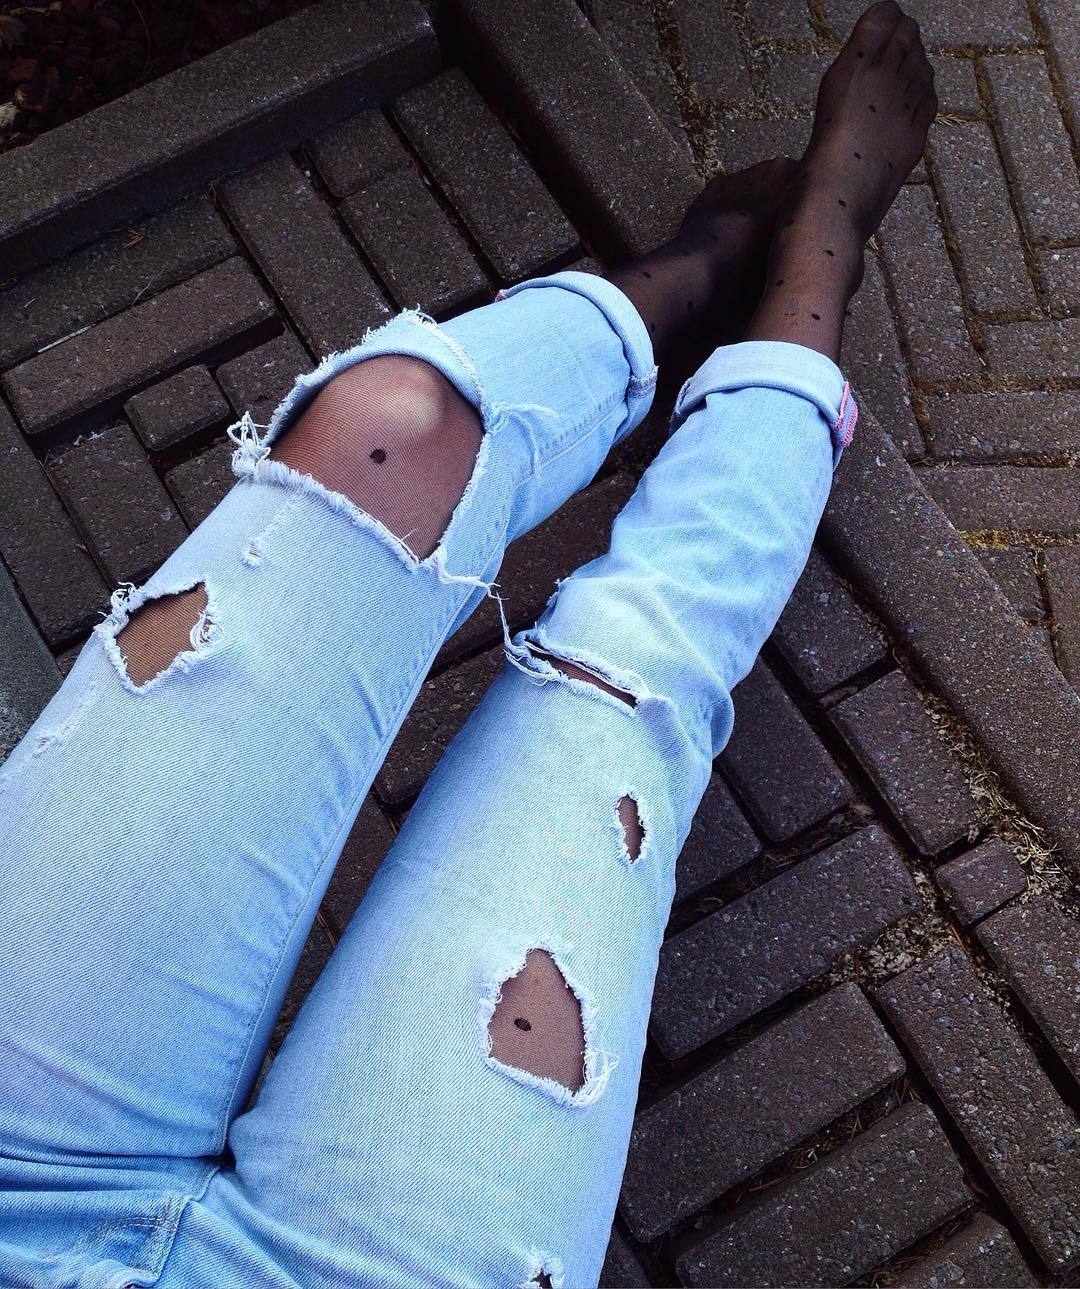 Ripped Jeans Fetish 5